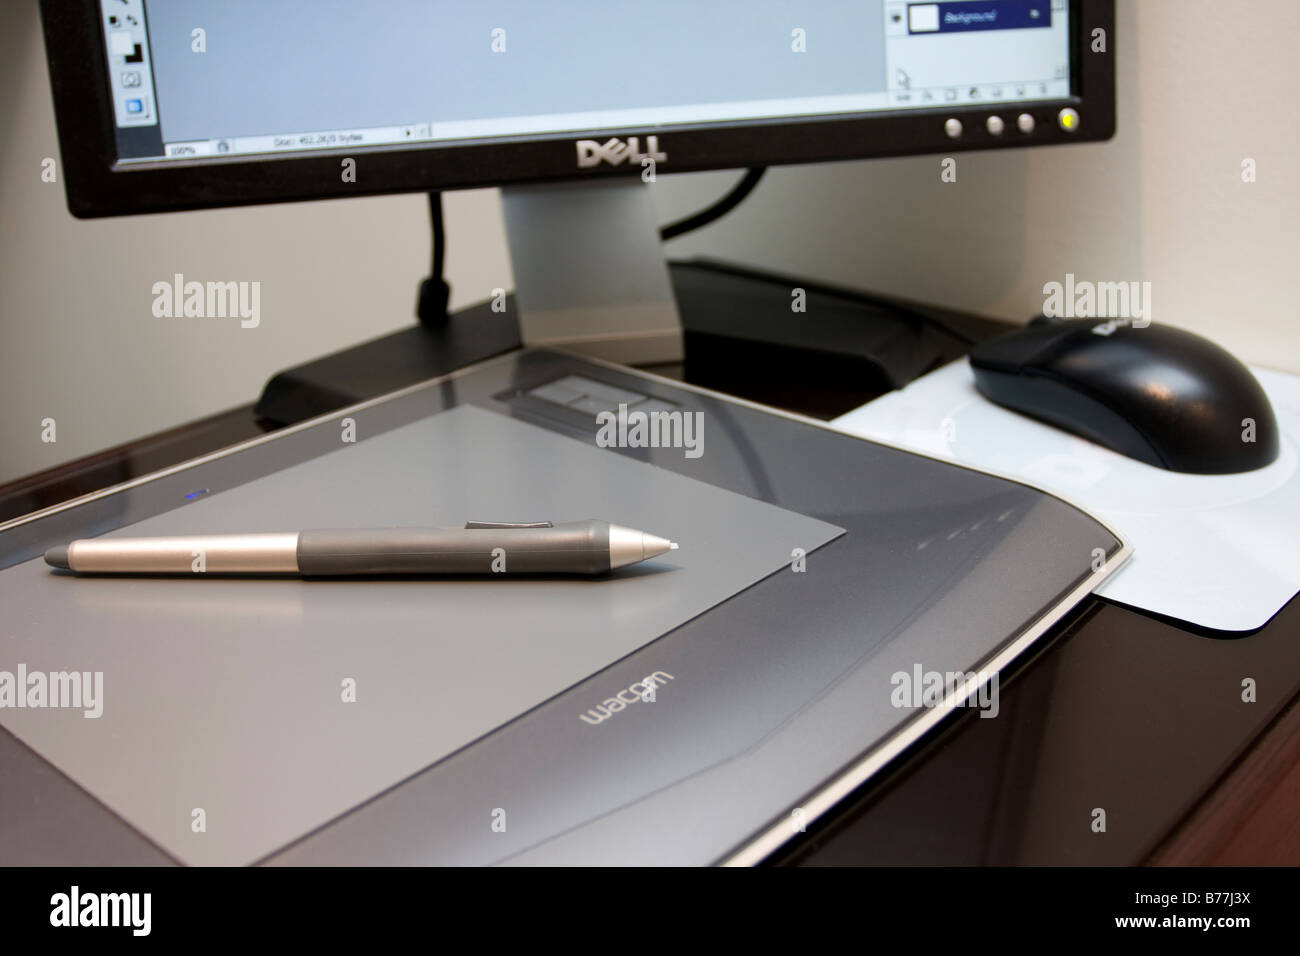 Wacom intuos 3 pen tablet hi-res stock photography and images - Alamy